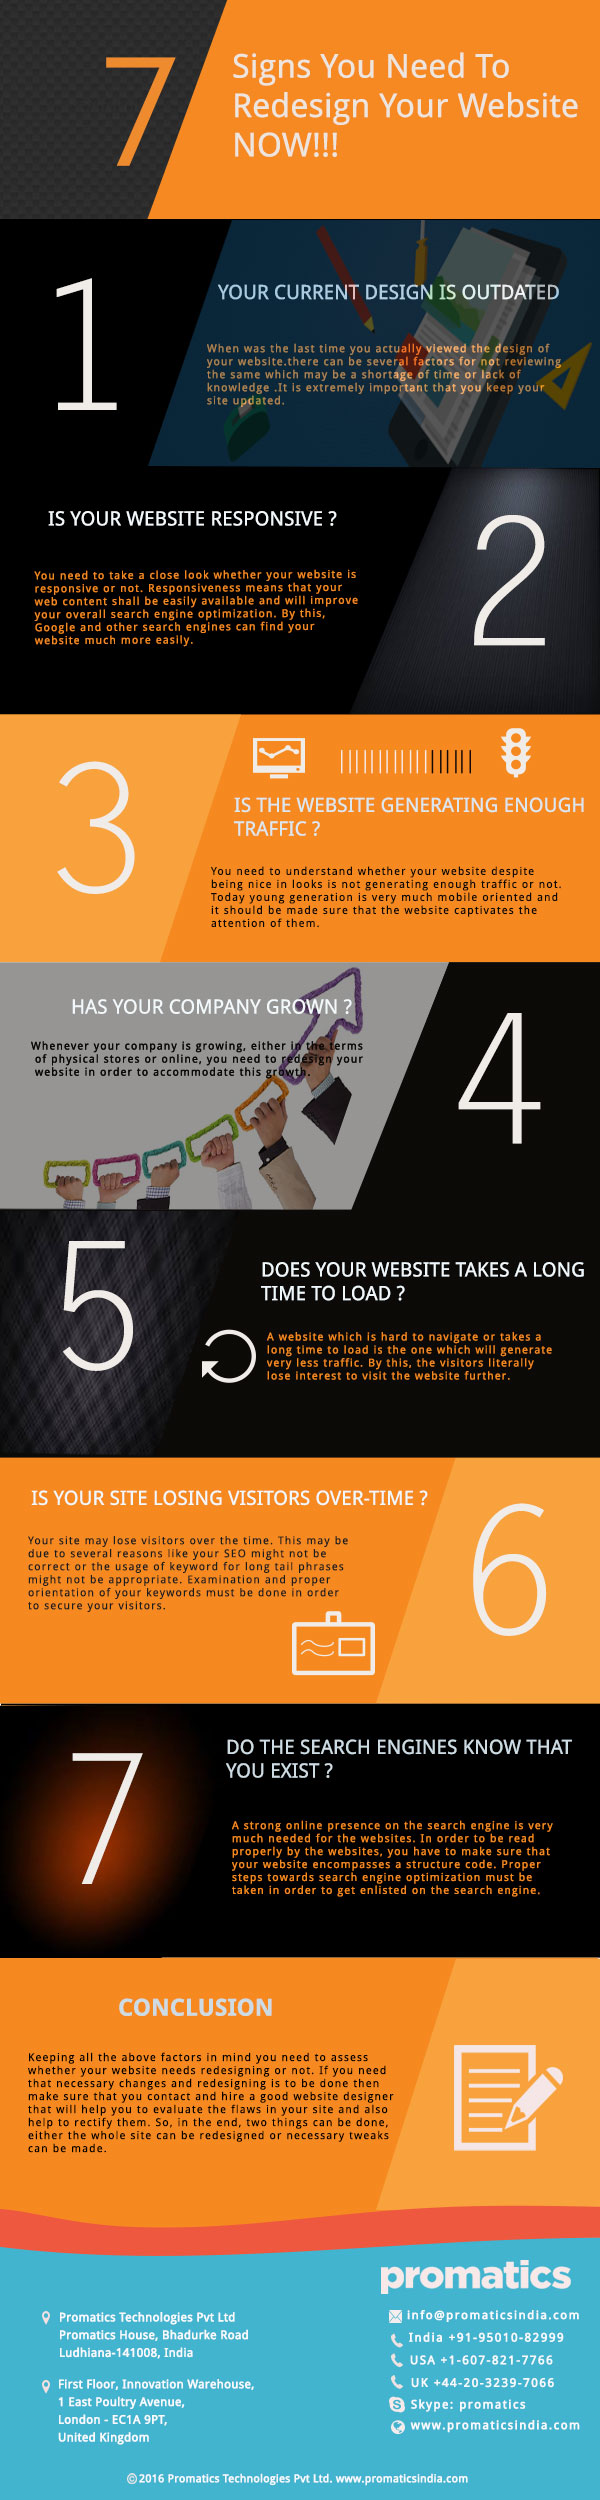 7 Signs You Need To Redesign Your Website NOW